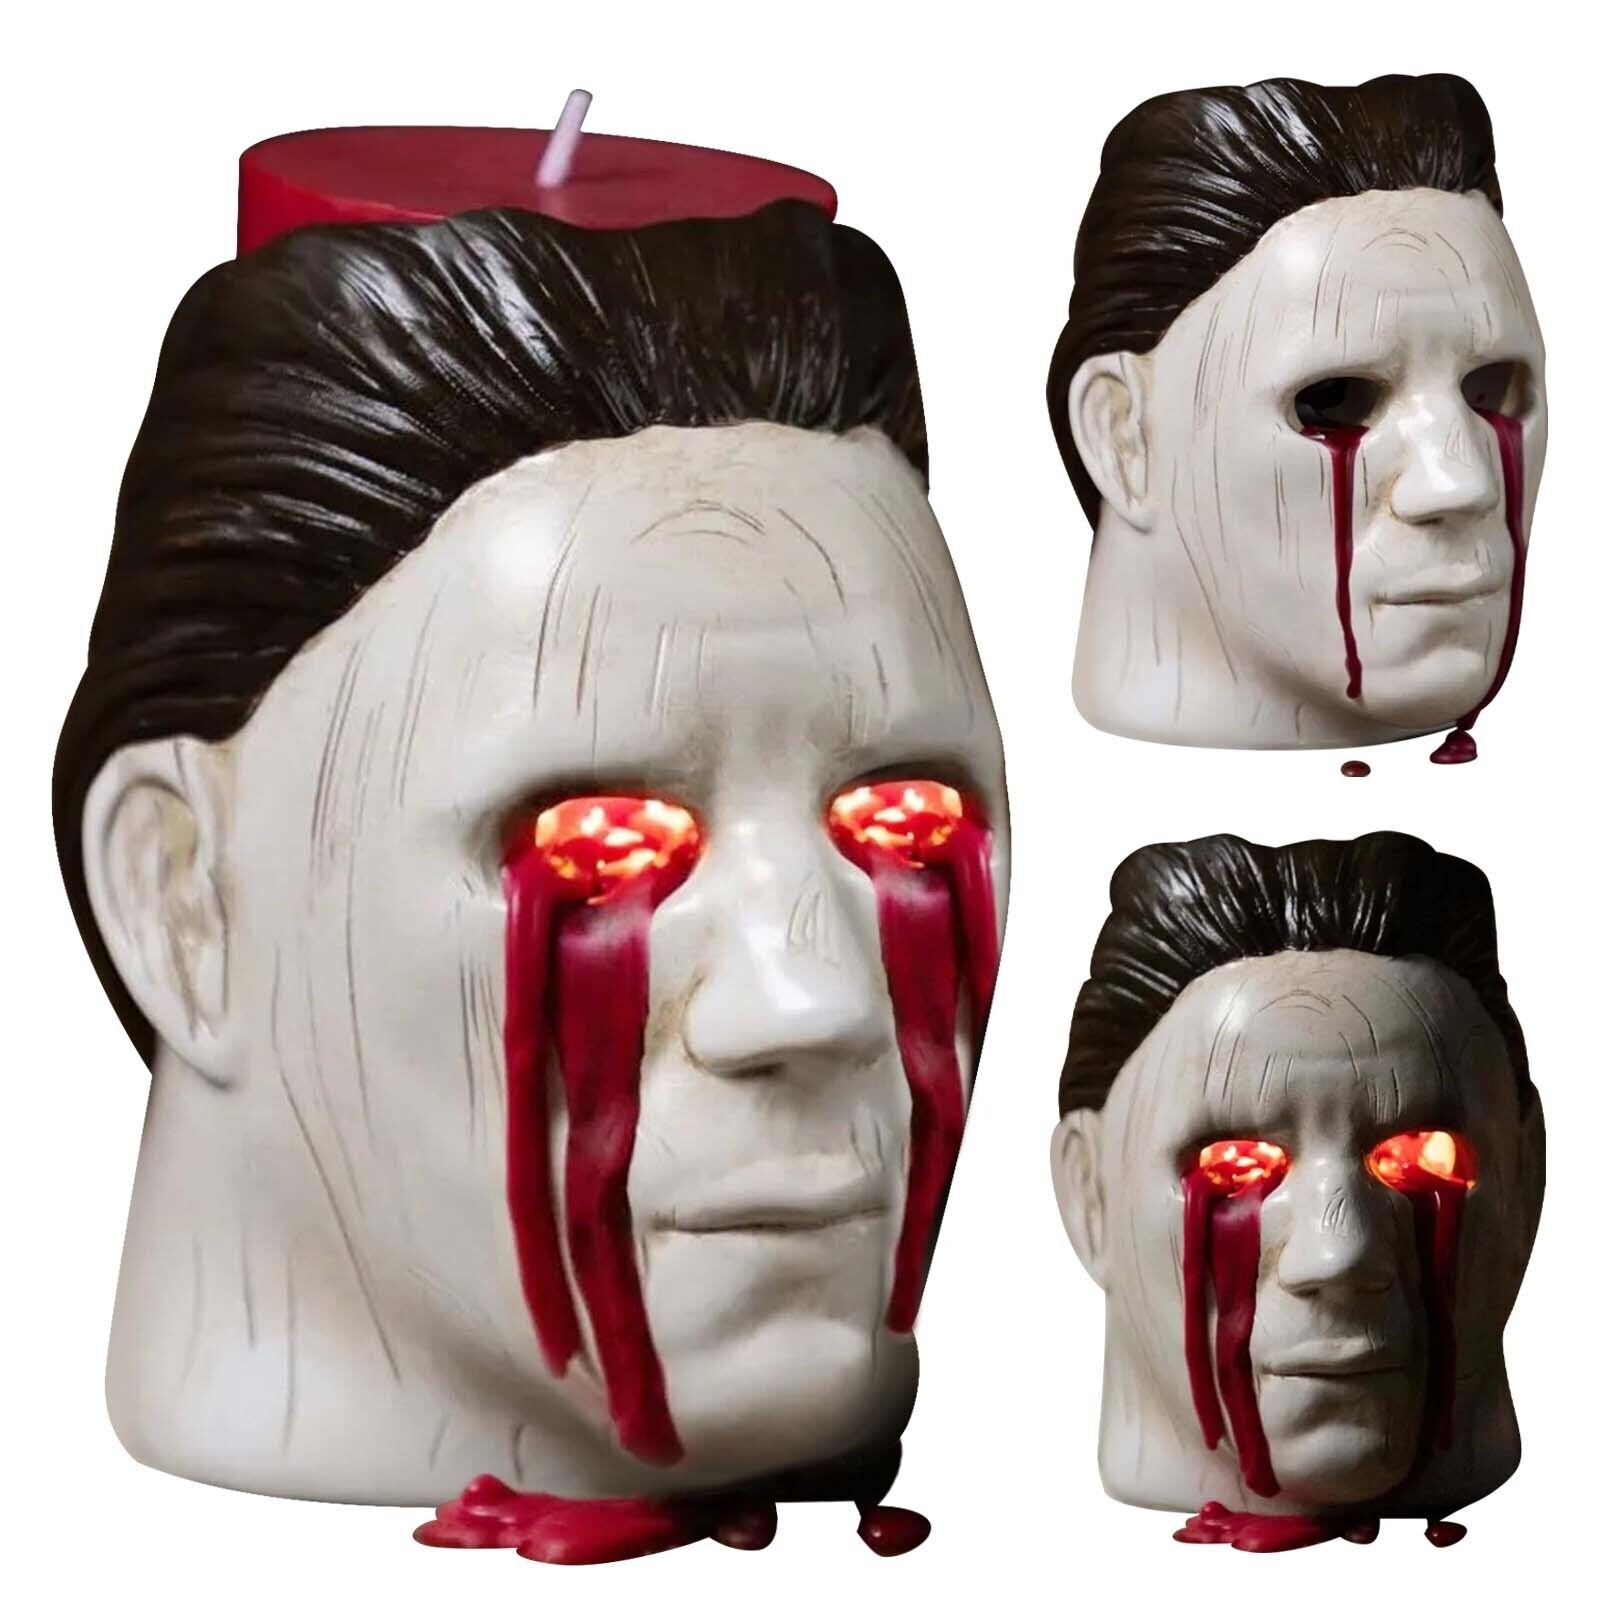 Michael Myers Candle,for Michael Myers Merchandise,Halloween Horror Candlestick